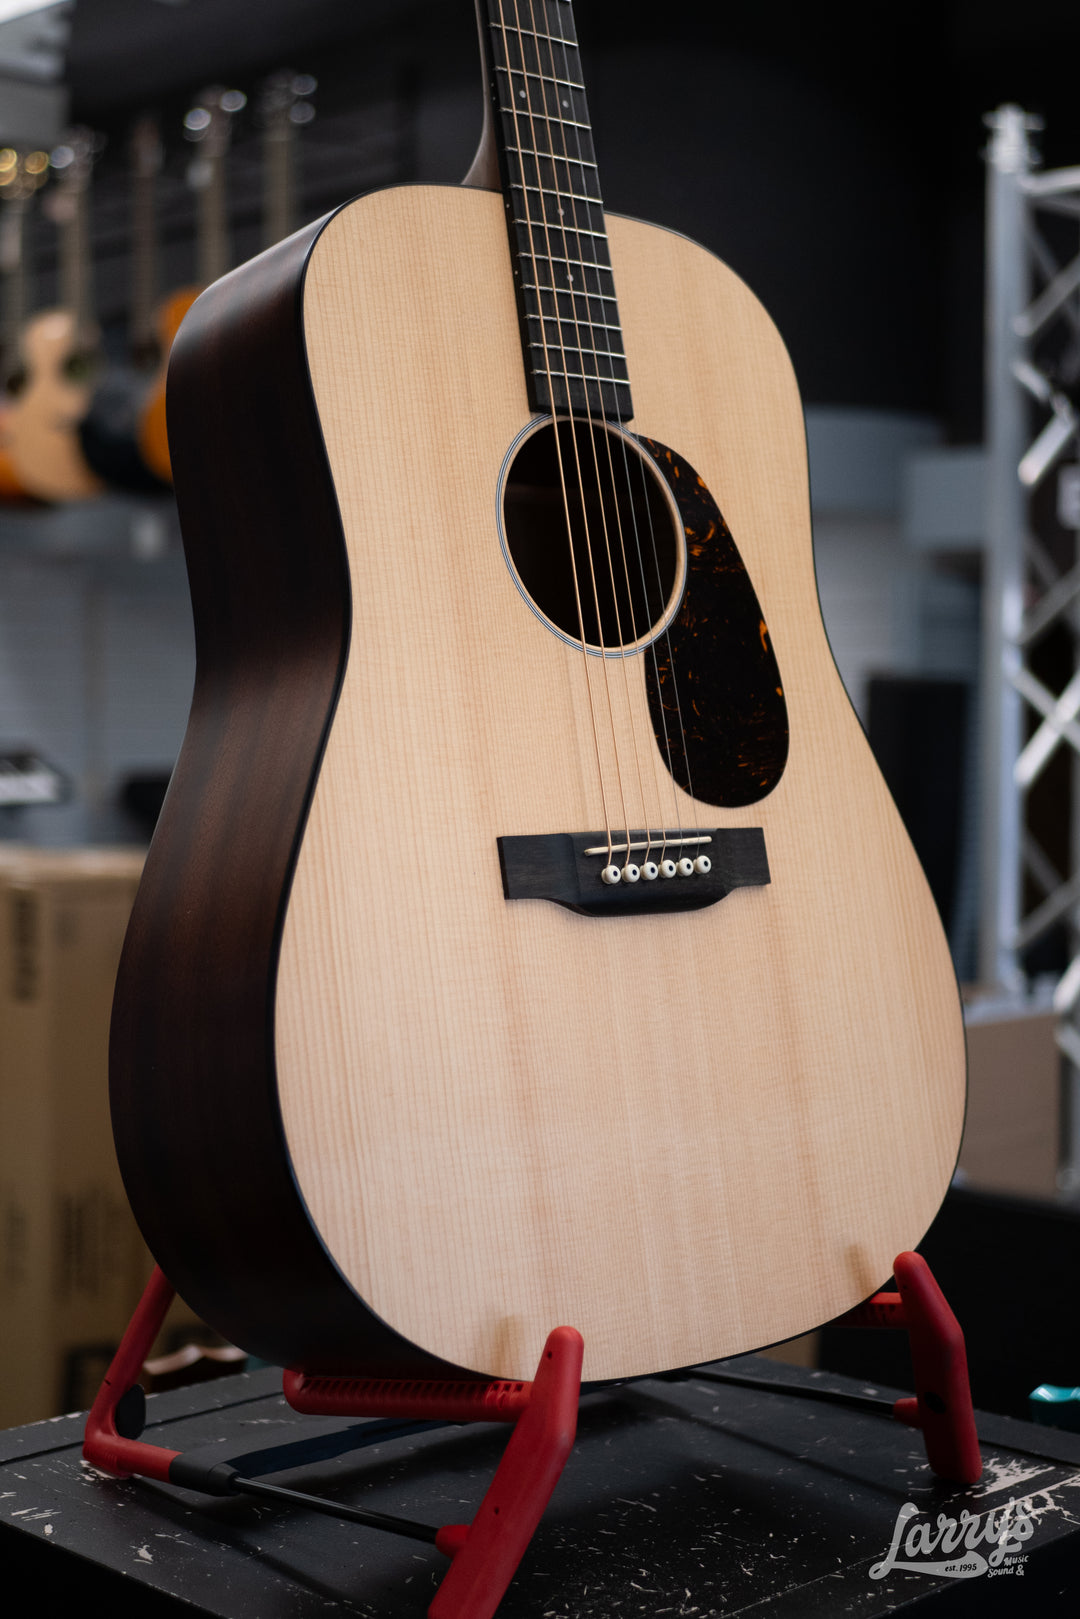 Martin Road Series Special - USED